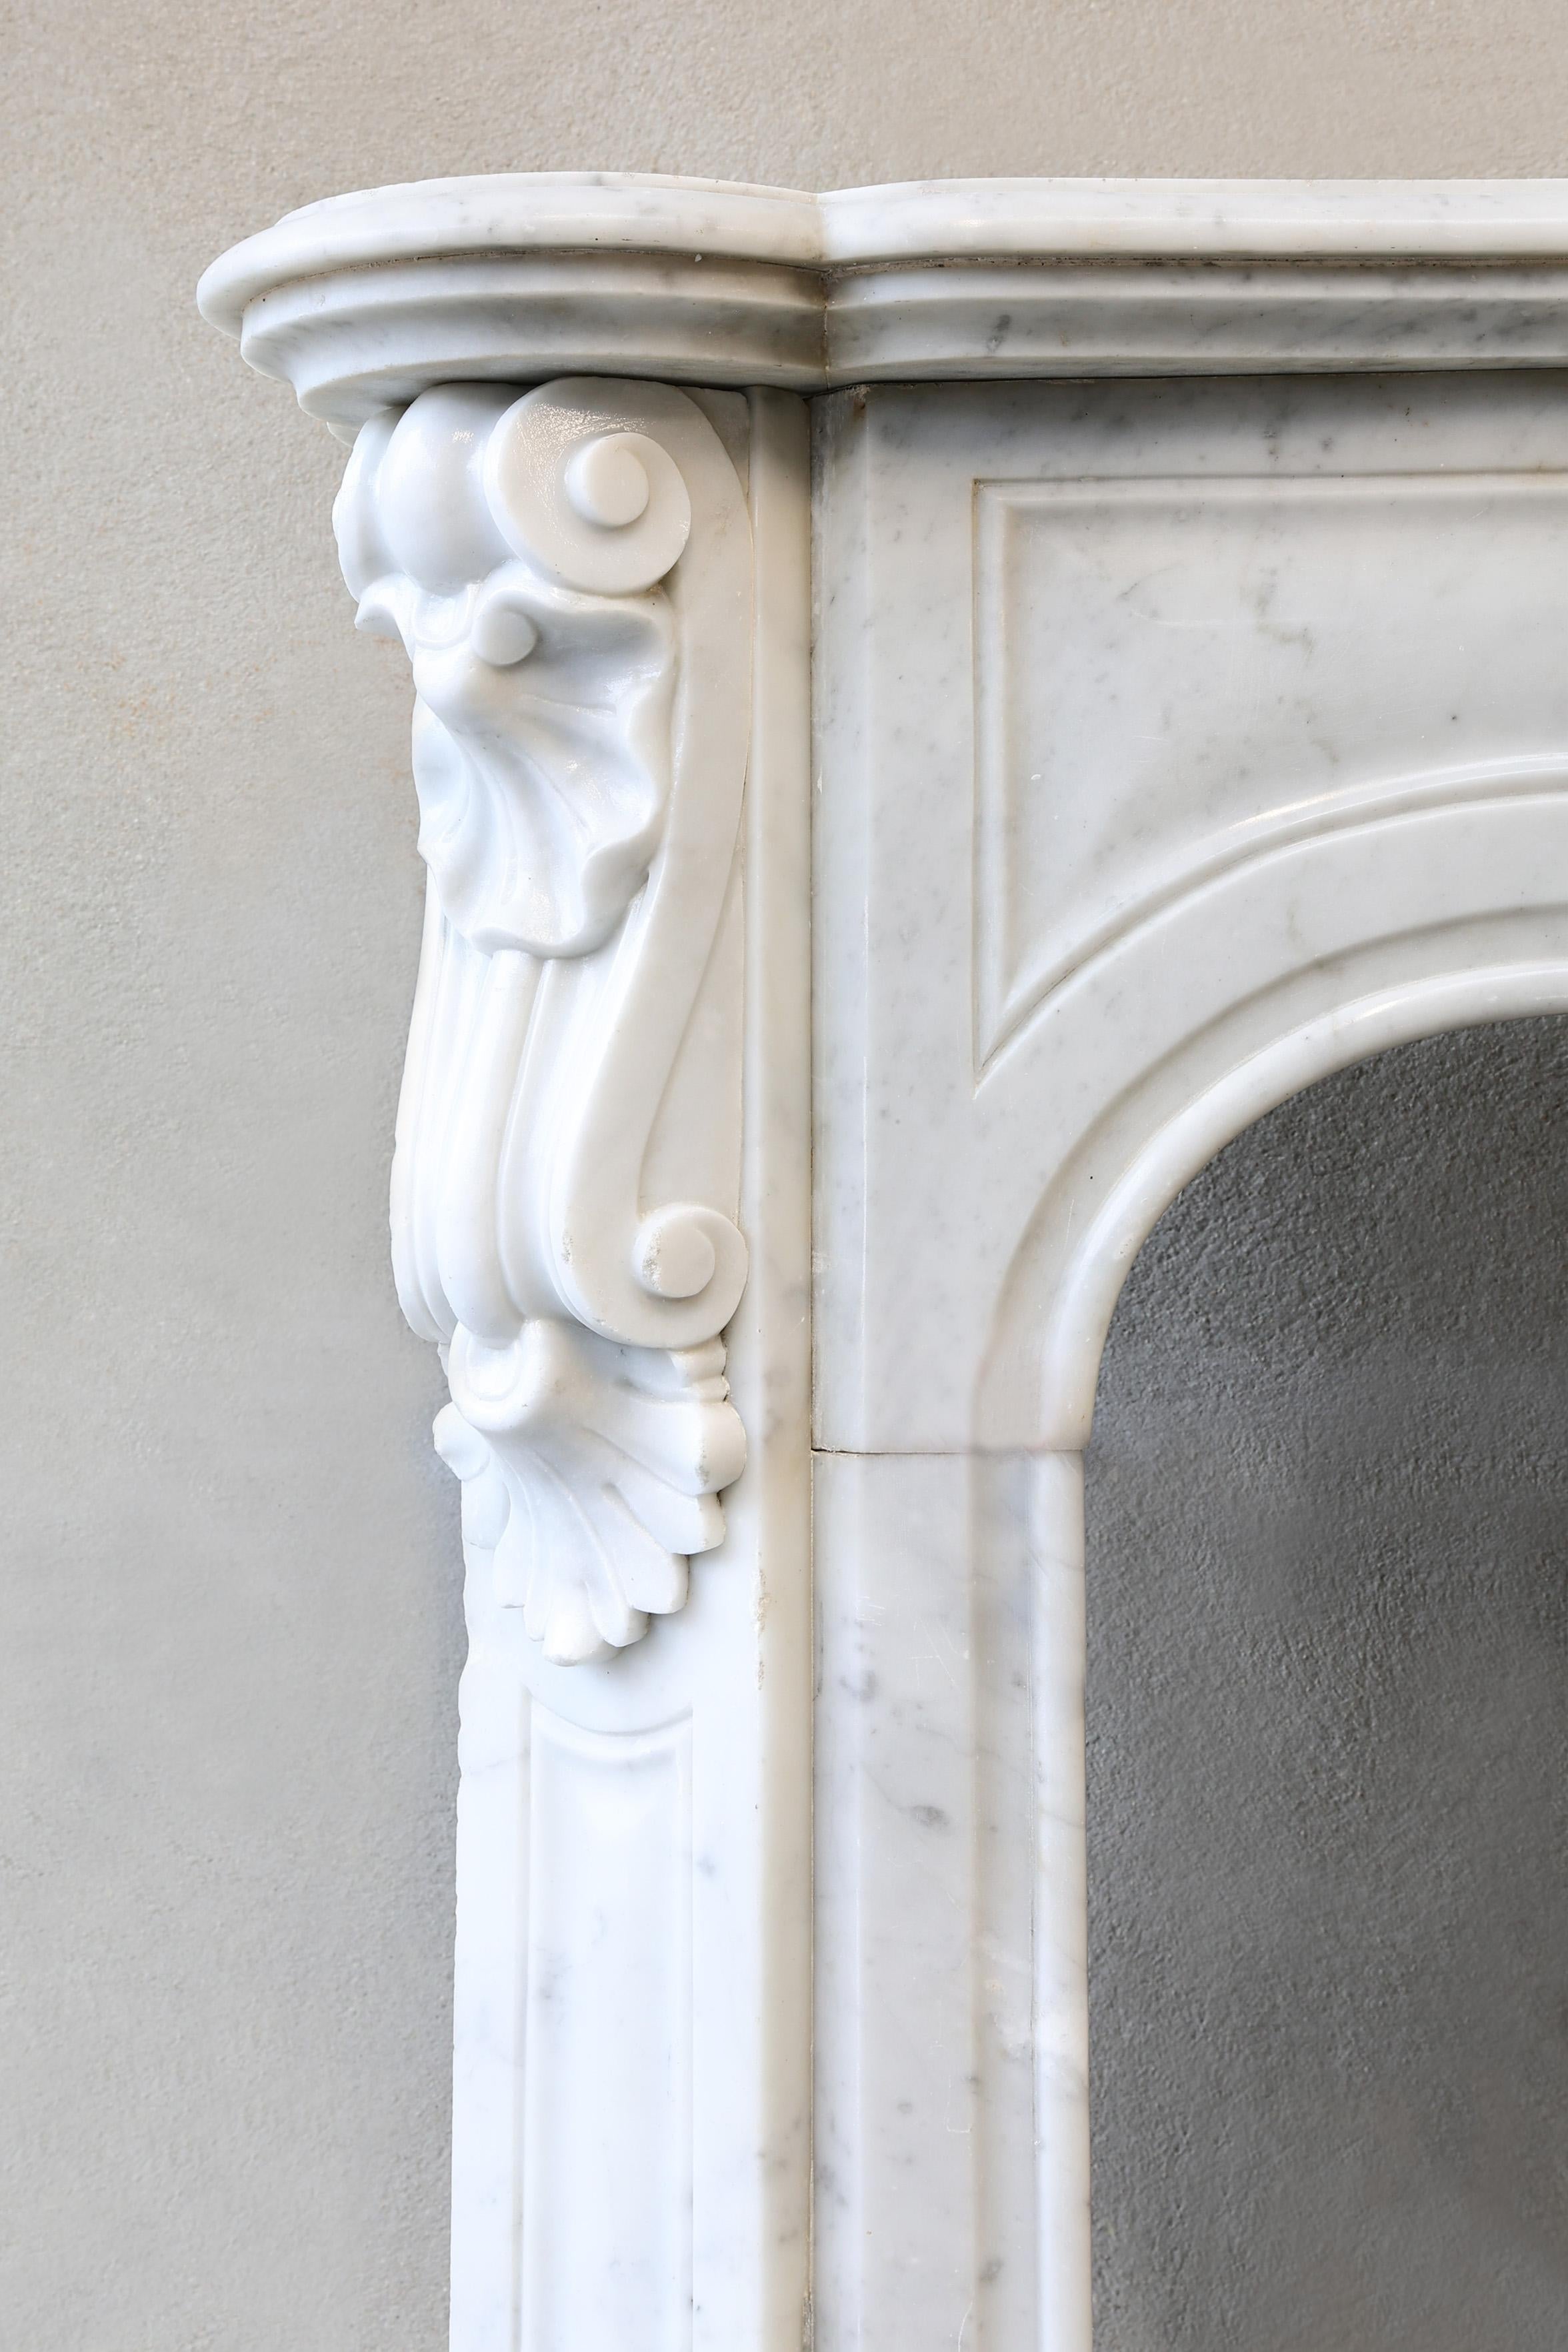 Beautiful antique Carrara marble fireplace from the 19th century in Pompadour style. This white marble fireplace has a beautiful ornament in the middle and graceful elements on the legs. A beautiful compact mantle surround that will fit well in many